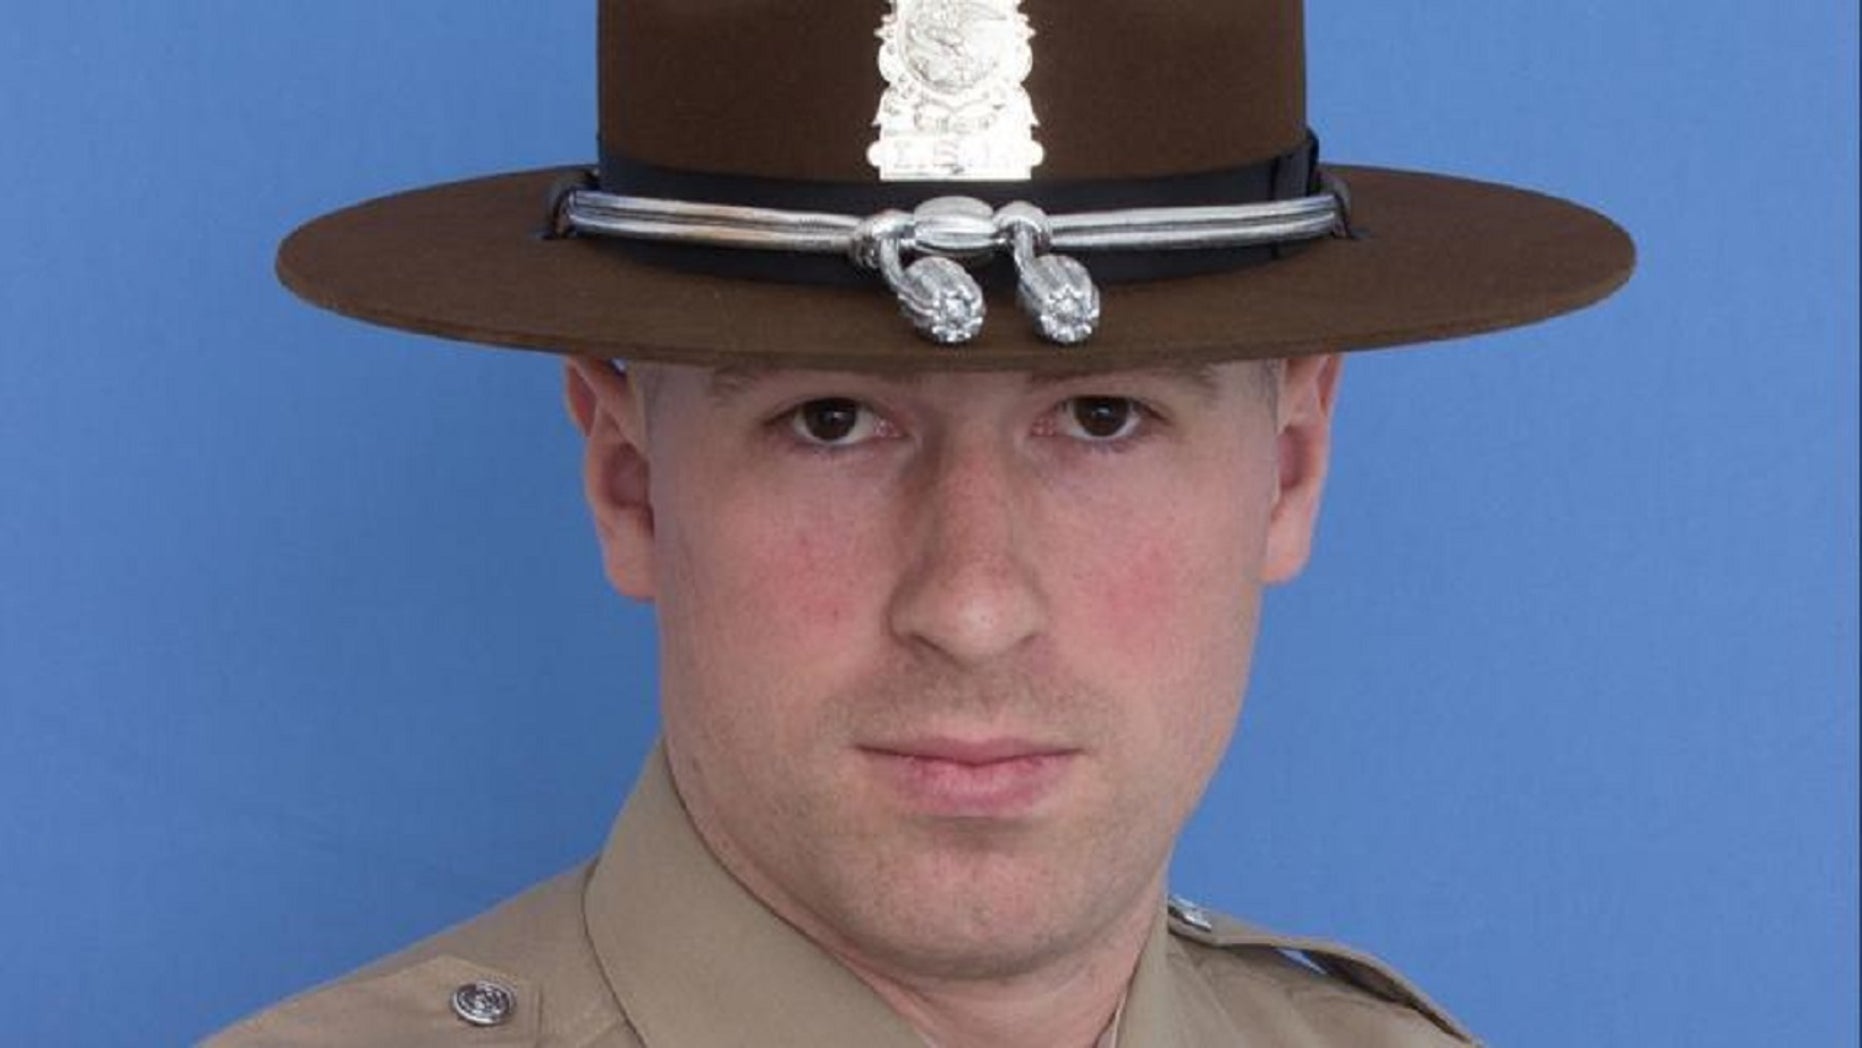 Illinois state trooper fatally stuck while investigating vehicle crash on interstate